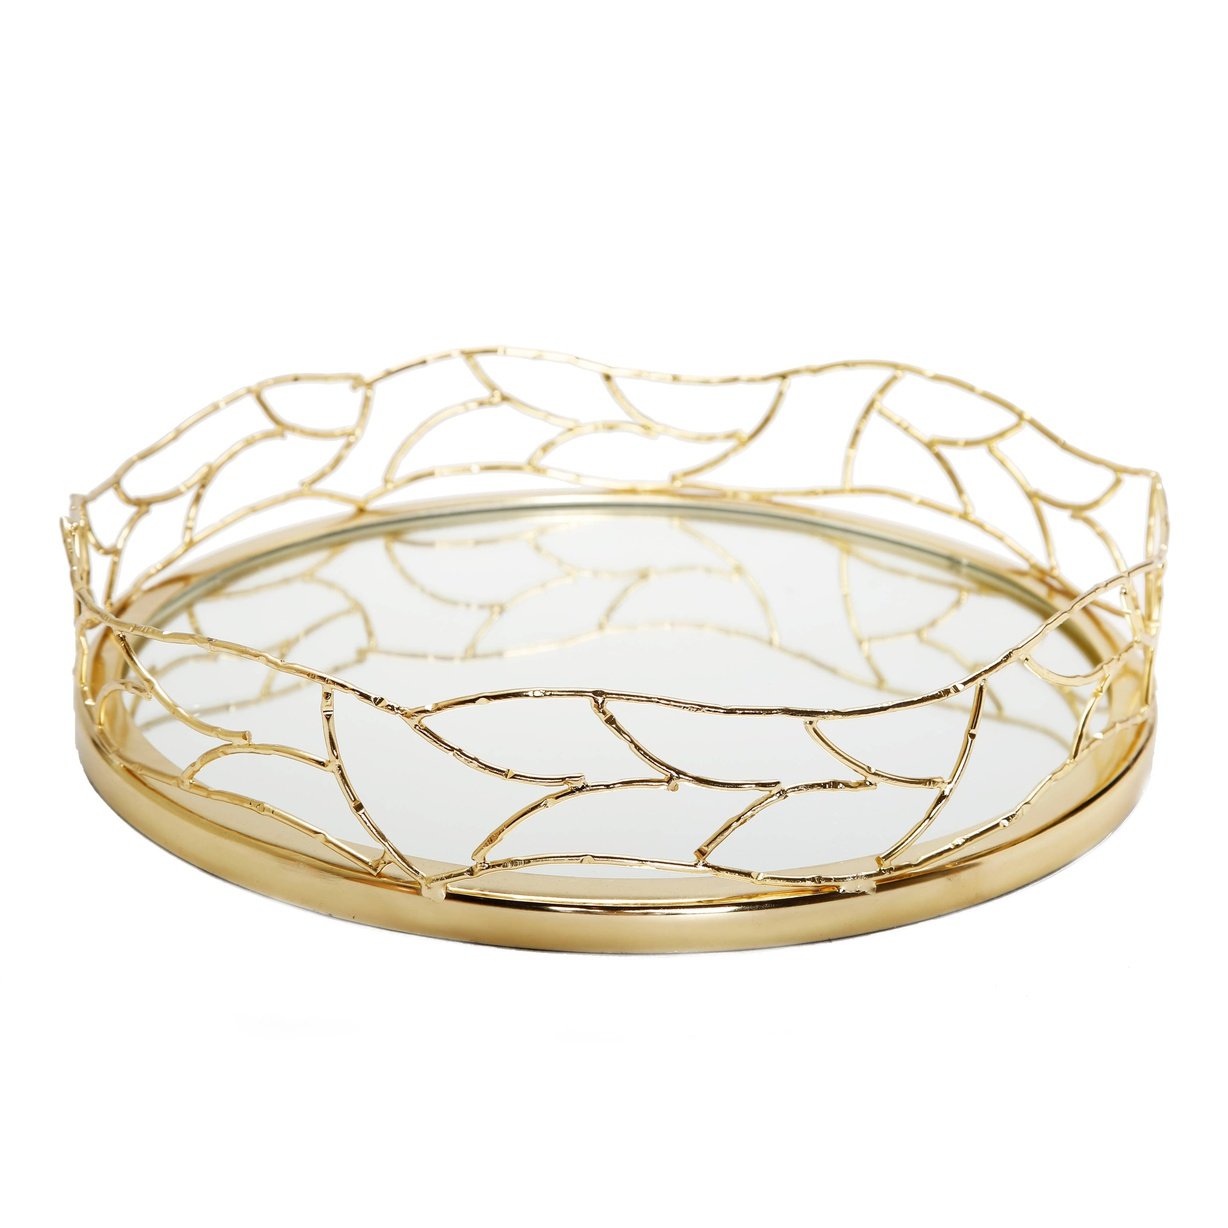 Gold Round Mirrored Tray - Exquisite Designs Home Décor 